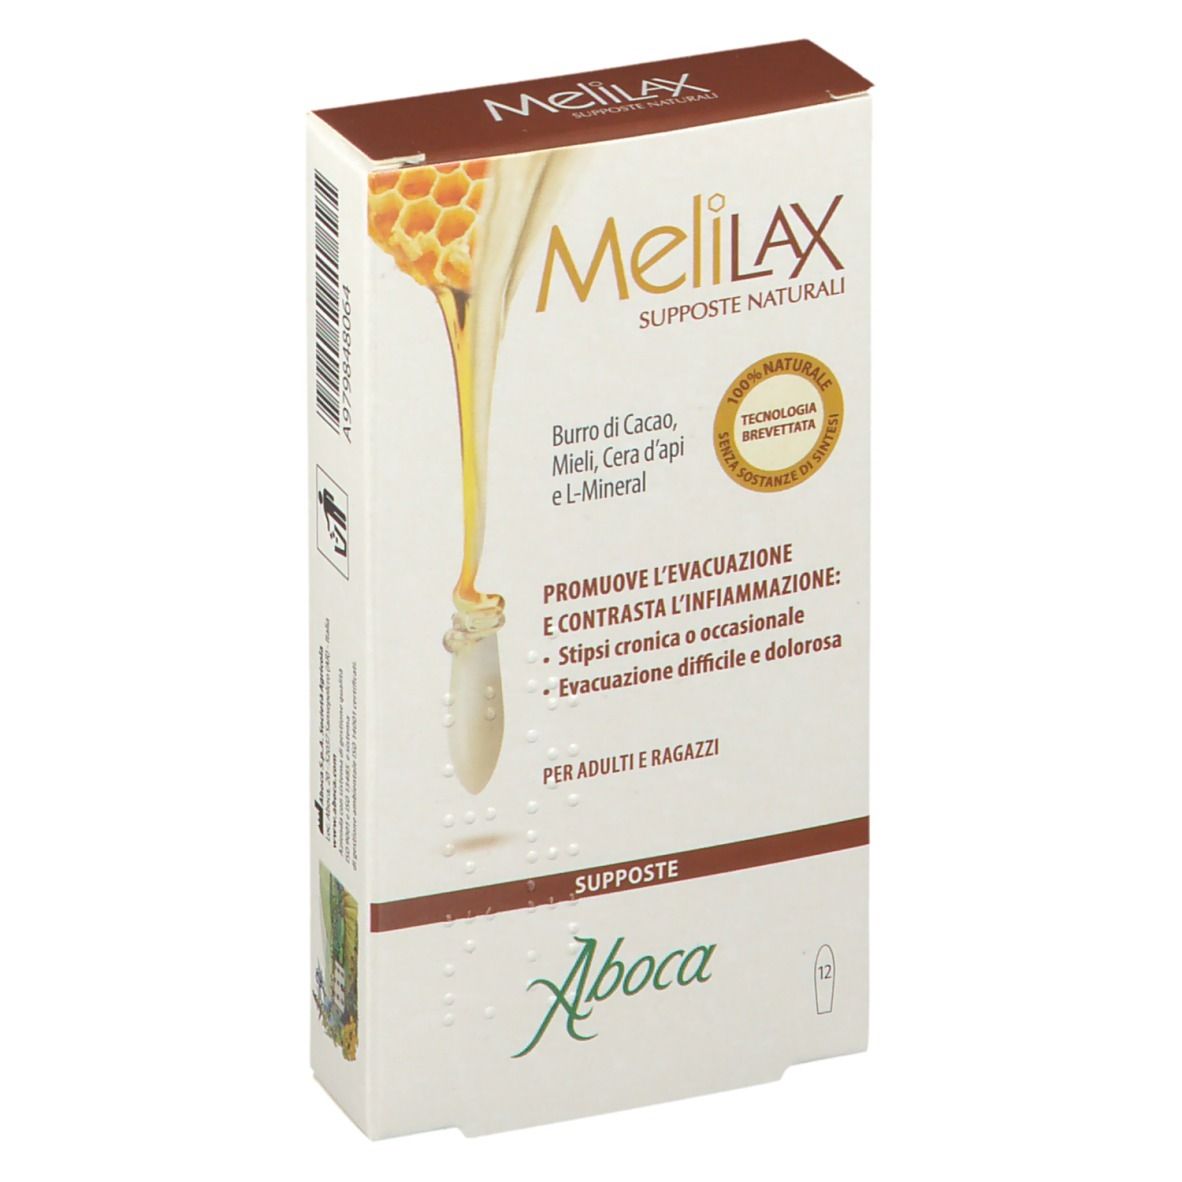 Image of Melilax Supposte